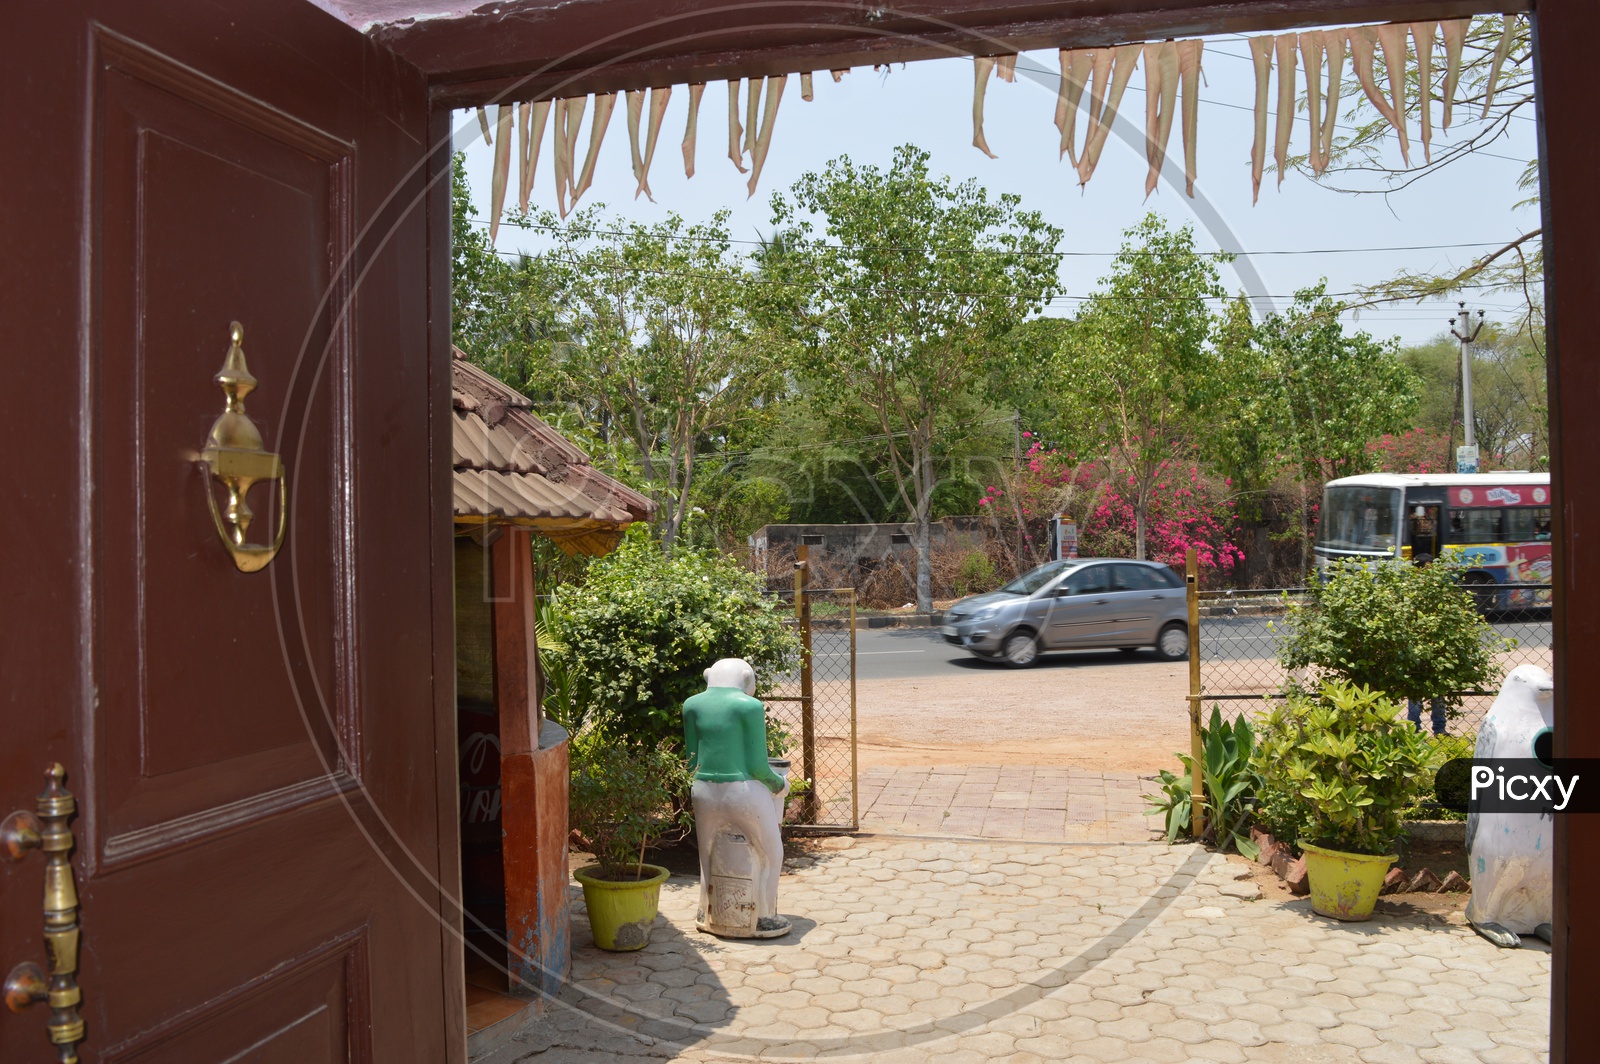 Entrance Of a Dhaba  With Village Theme